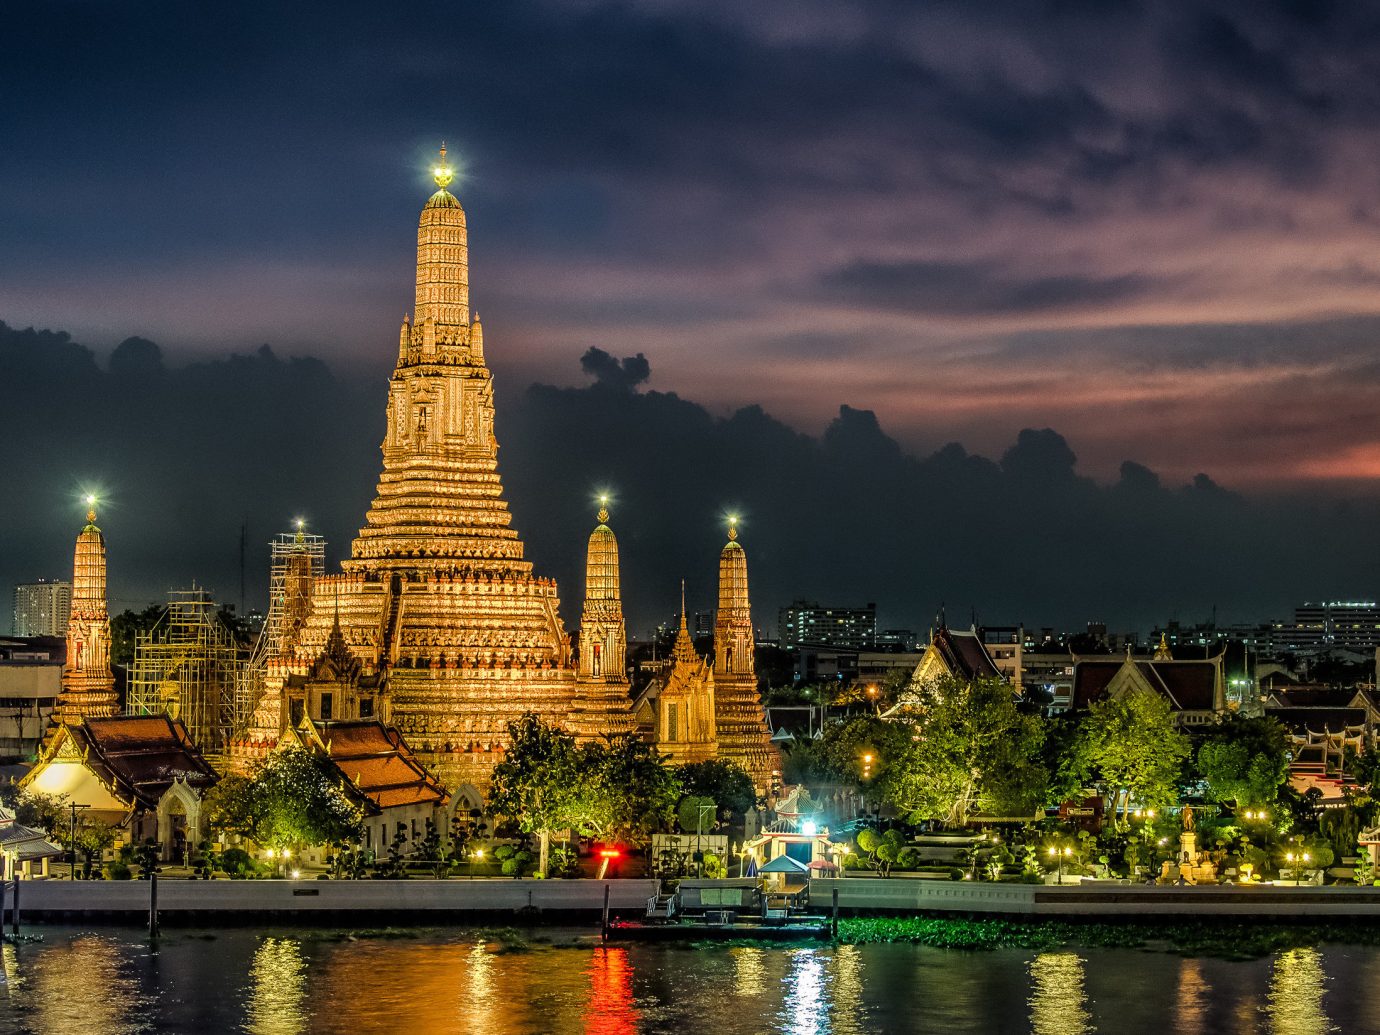 Hotels water sky outdoor River landmark night reflection City cityscape human settlement evening temple skyline dusk pagoda place of worship tower wat cloudy